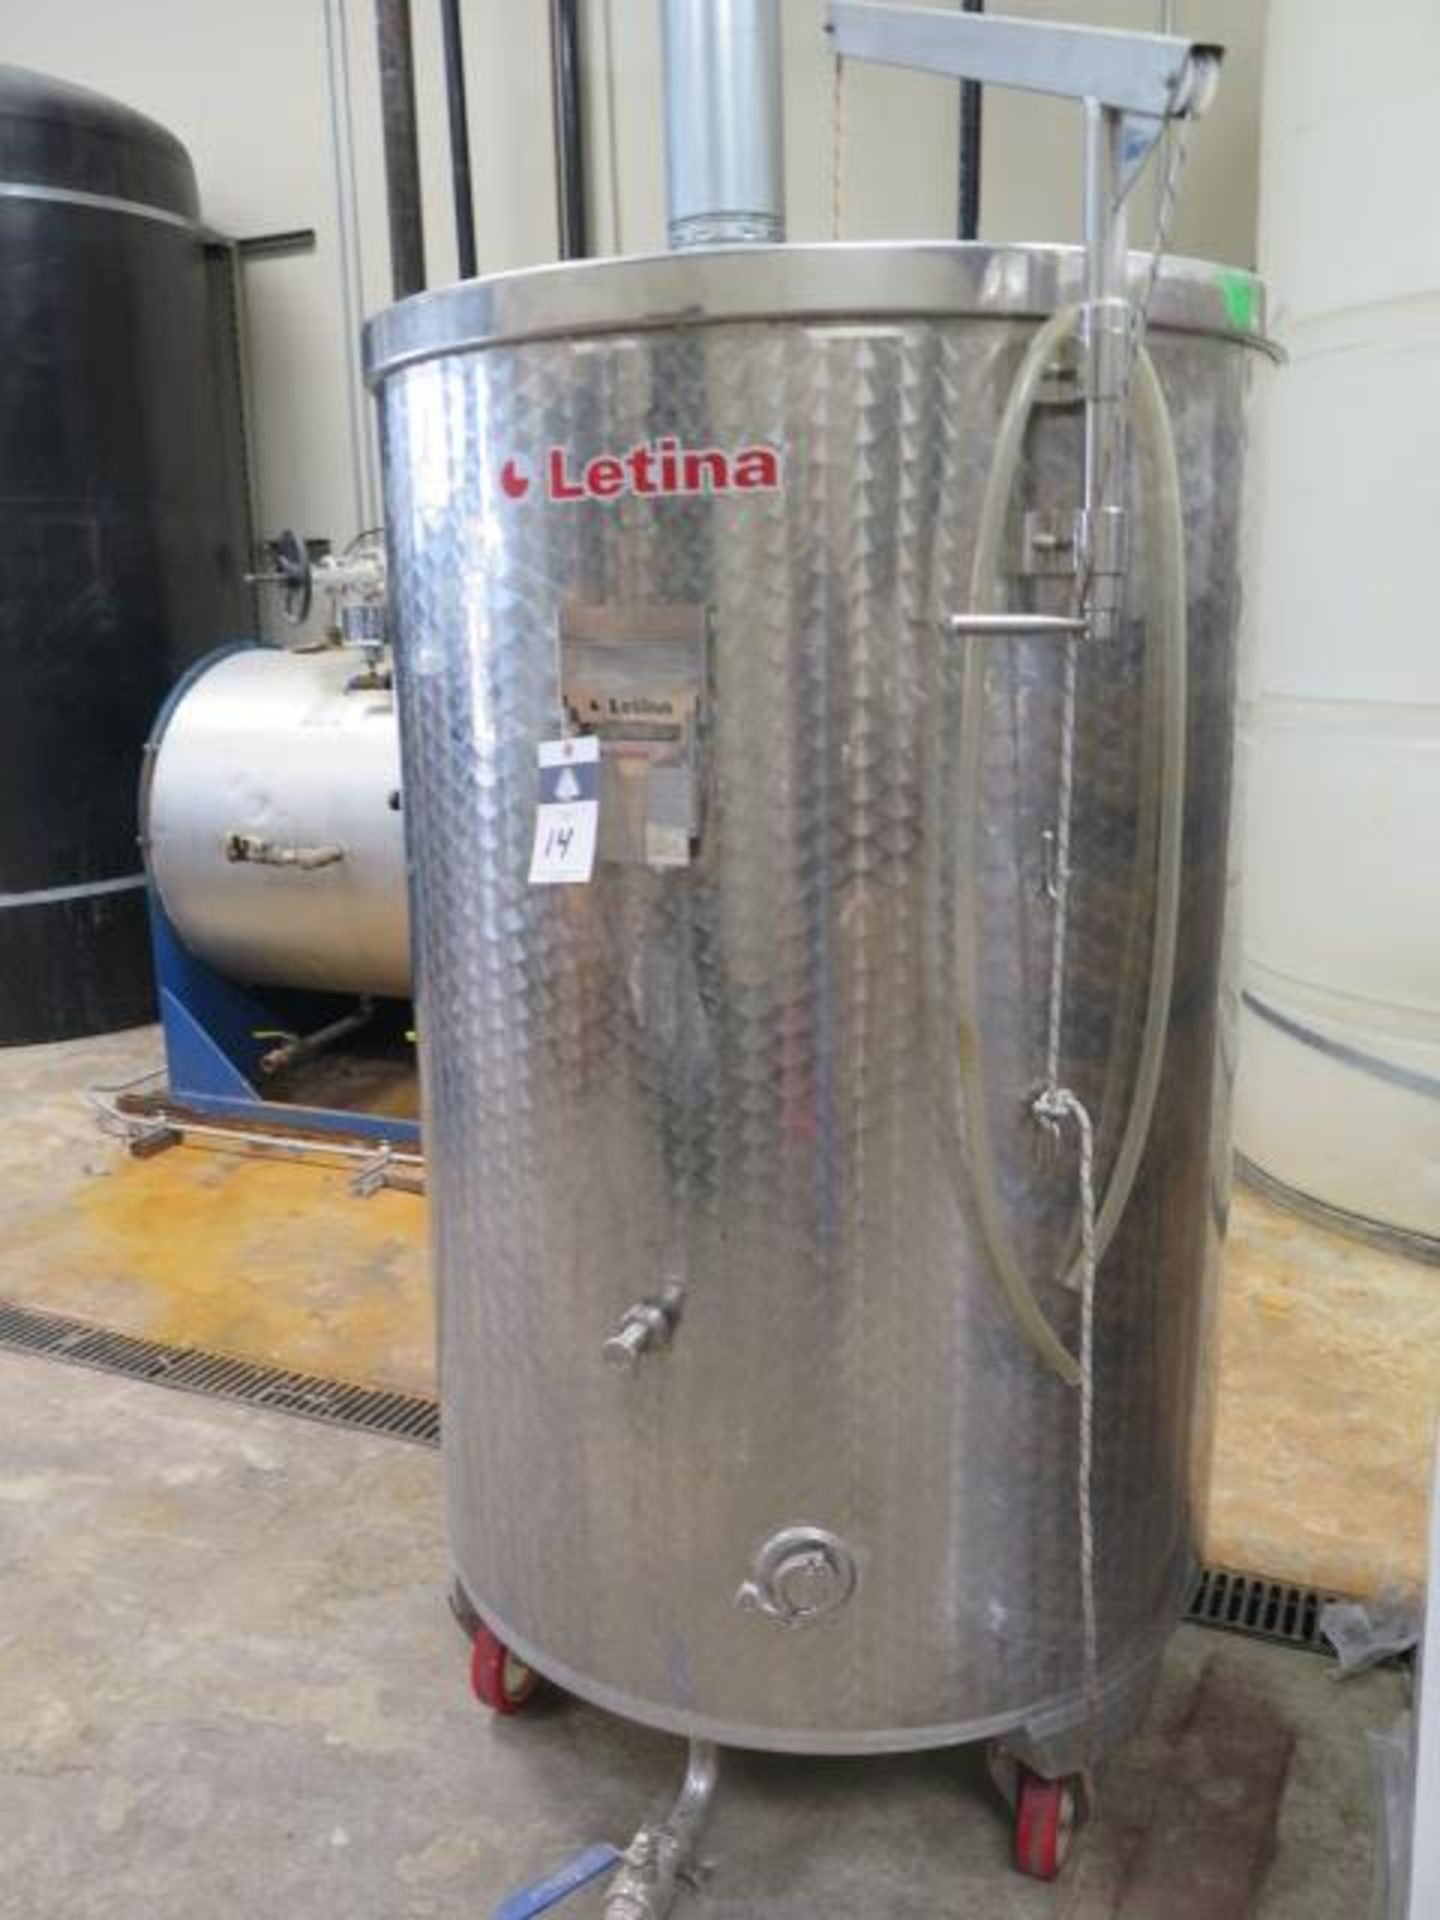 2015 Letina type PZ1000S10 1000 Liter Rolling Storage Tank s/n 006715/6 (SOLD AS-IS - NO WARRANTY) - Image 3 of 12